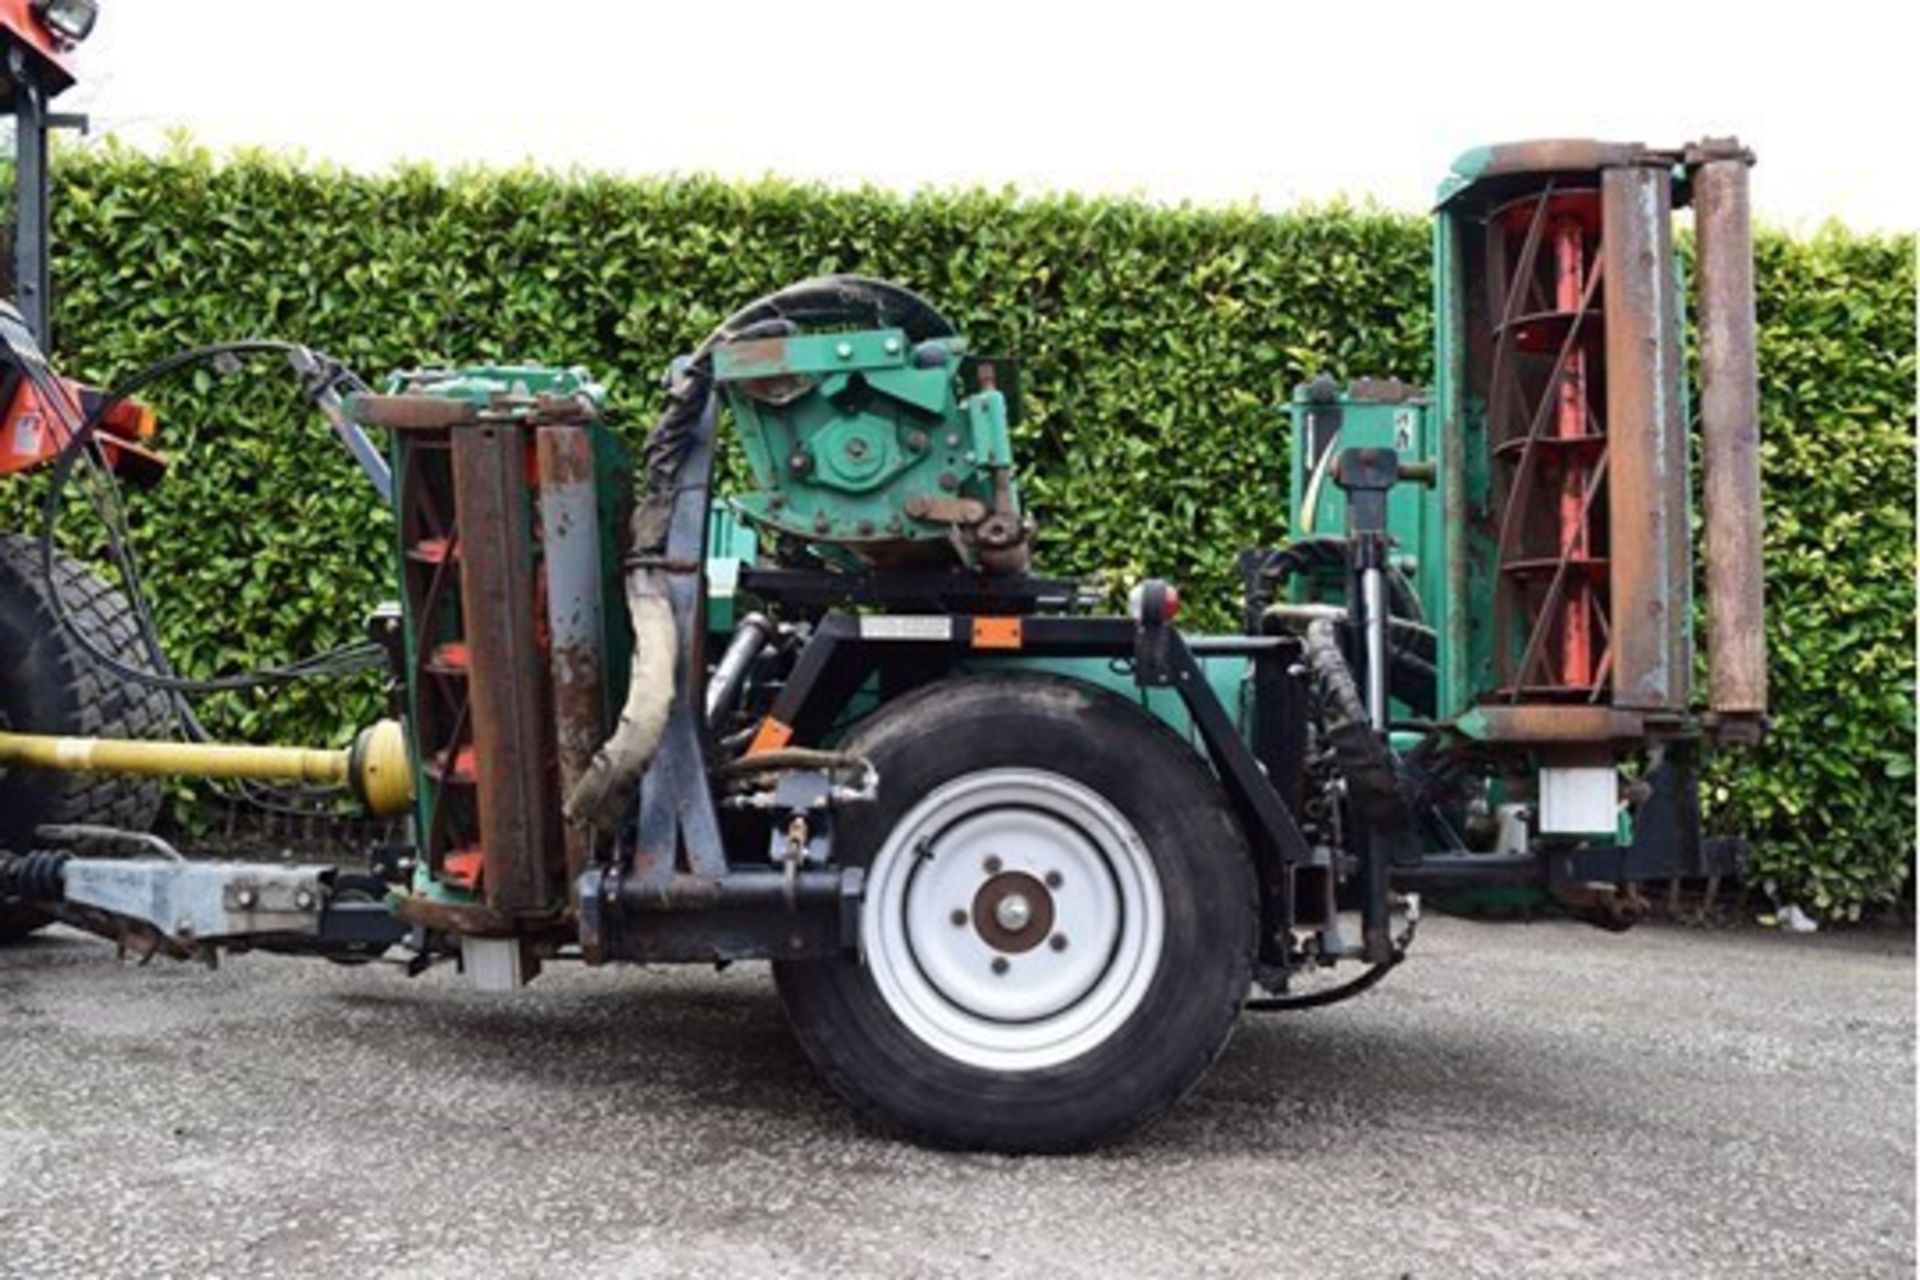 2009 Ransomes TG4650 Tractor Mount Trailed Cylinder Gang Mower - Image 5 of 13